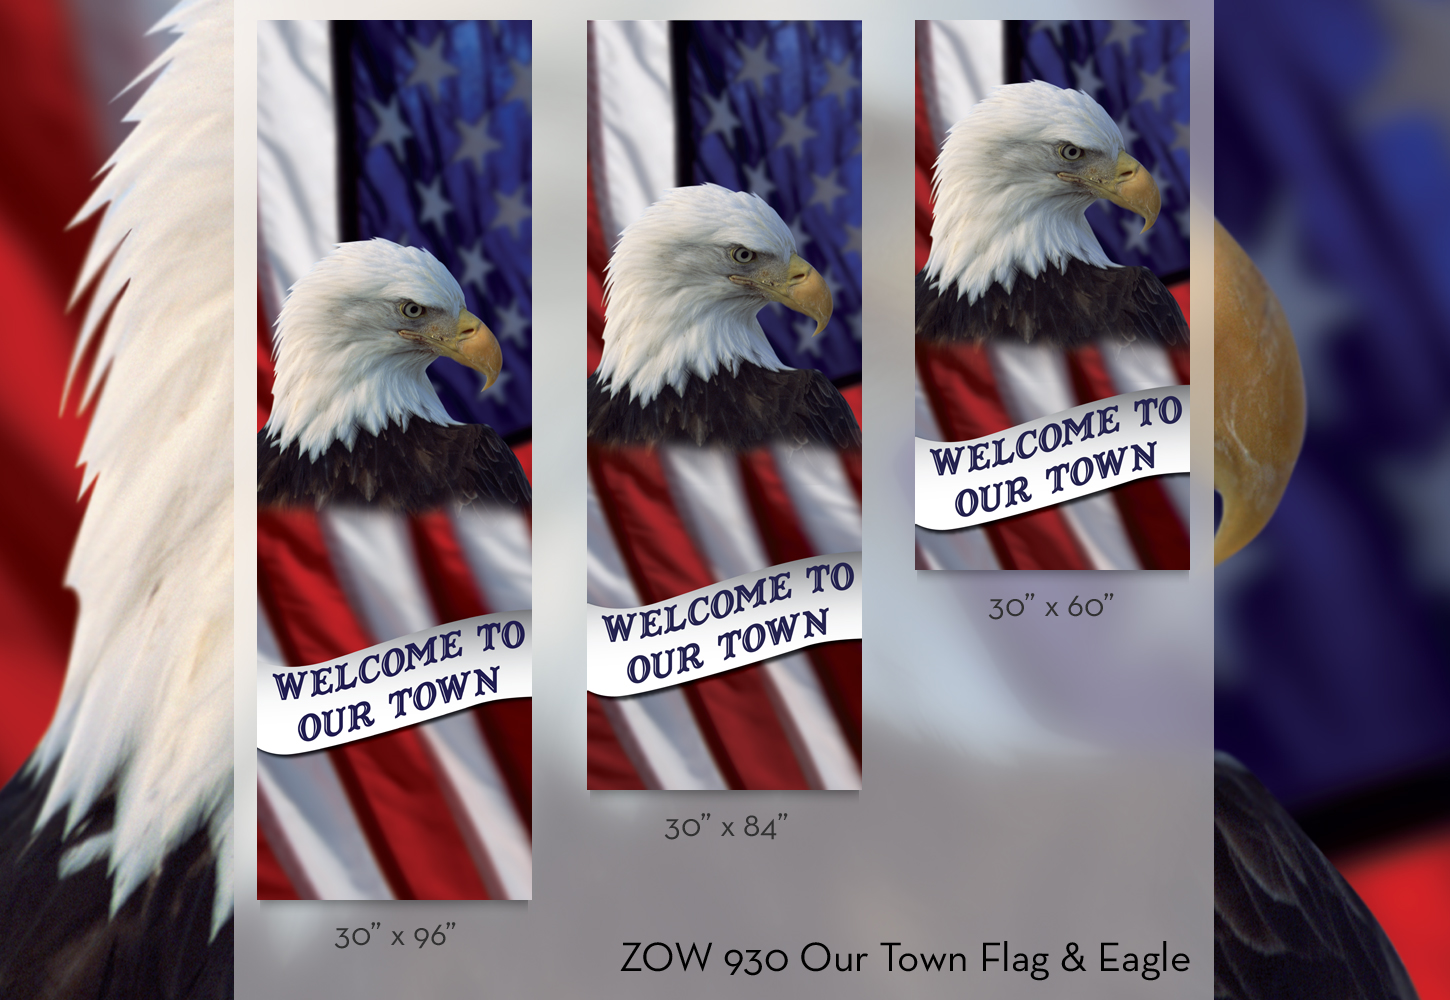 ZOW 930 Our Town Flag & Eagle